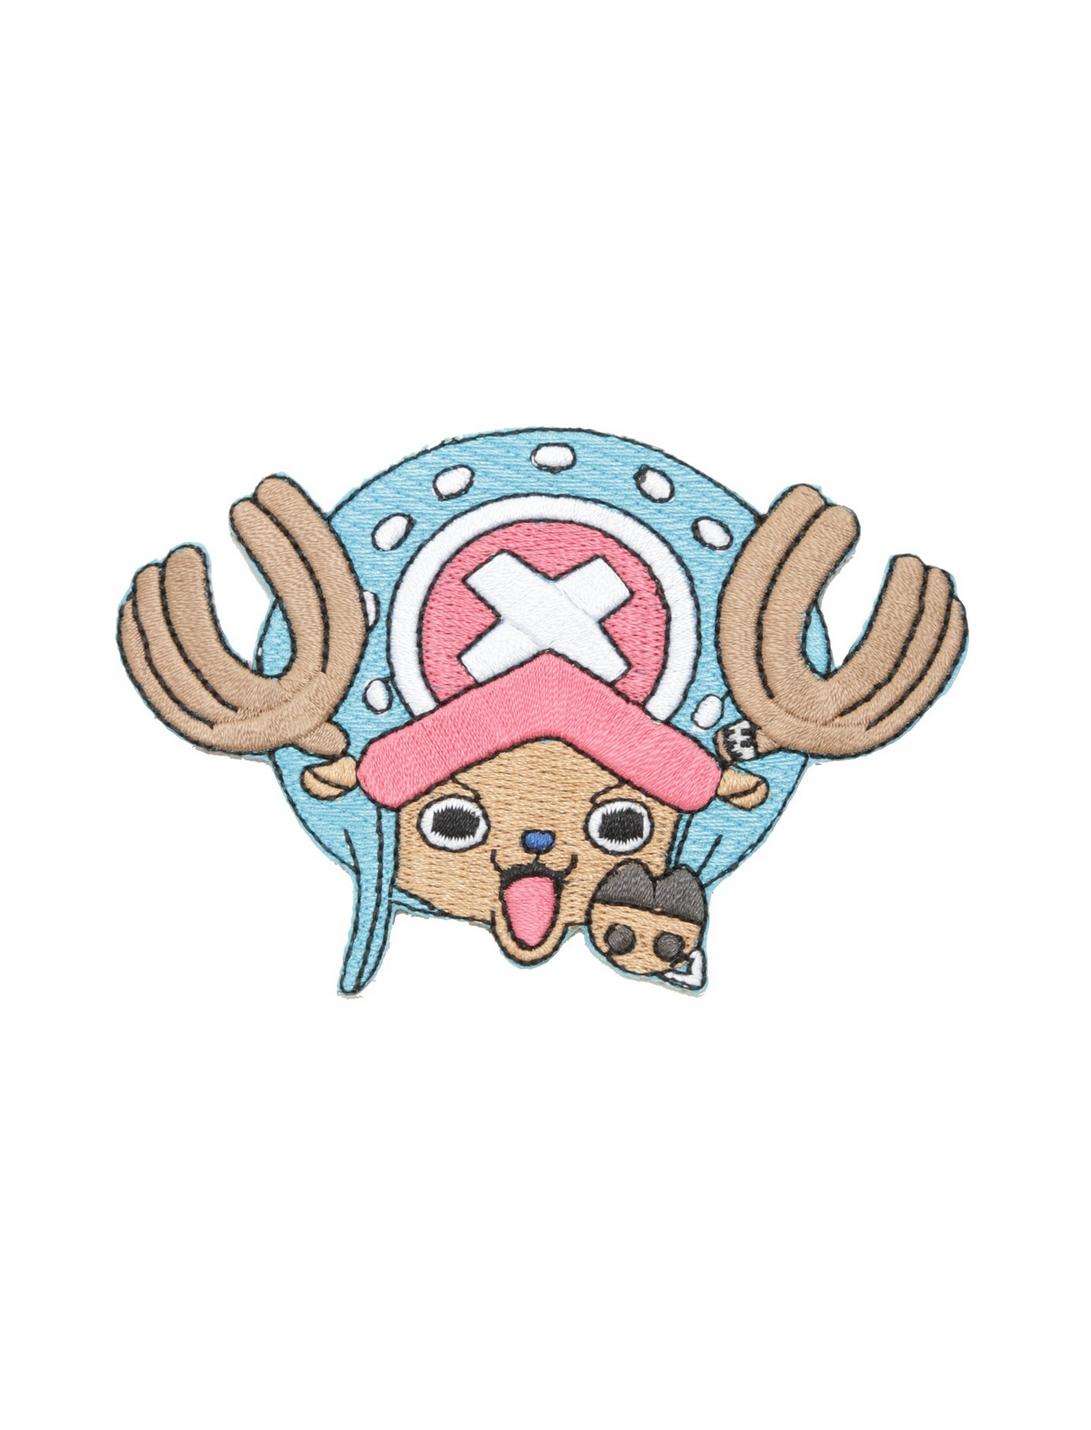 One Piece Chopper Iron-On Patch, , hi-res